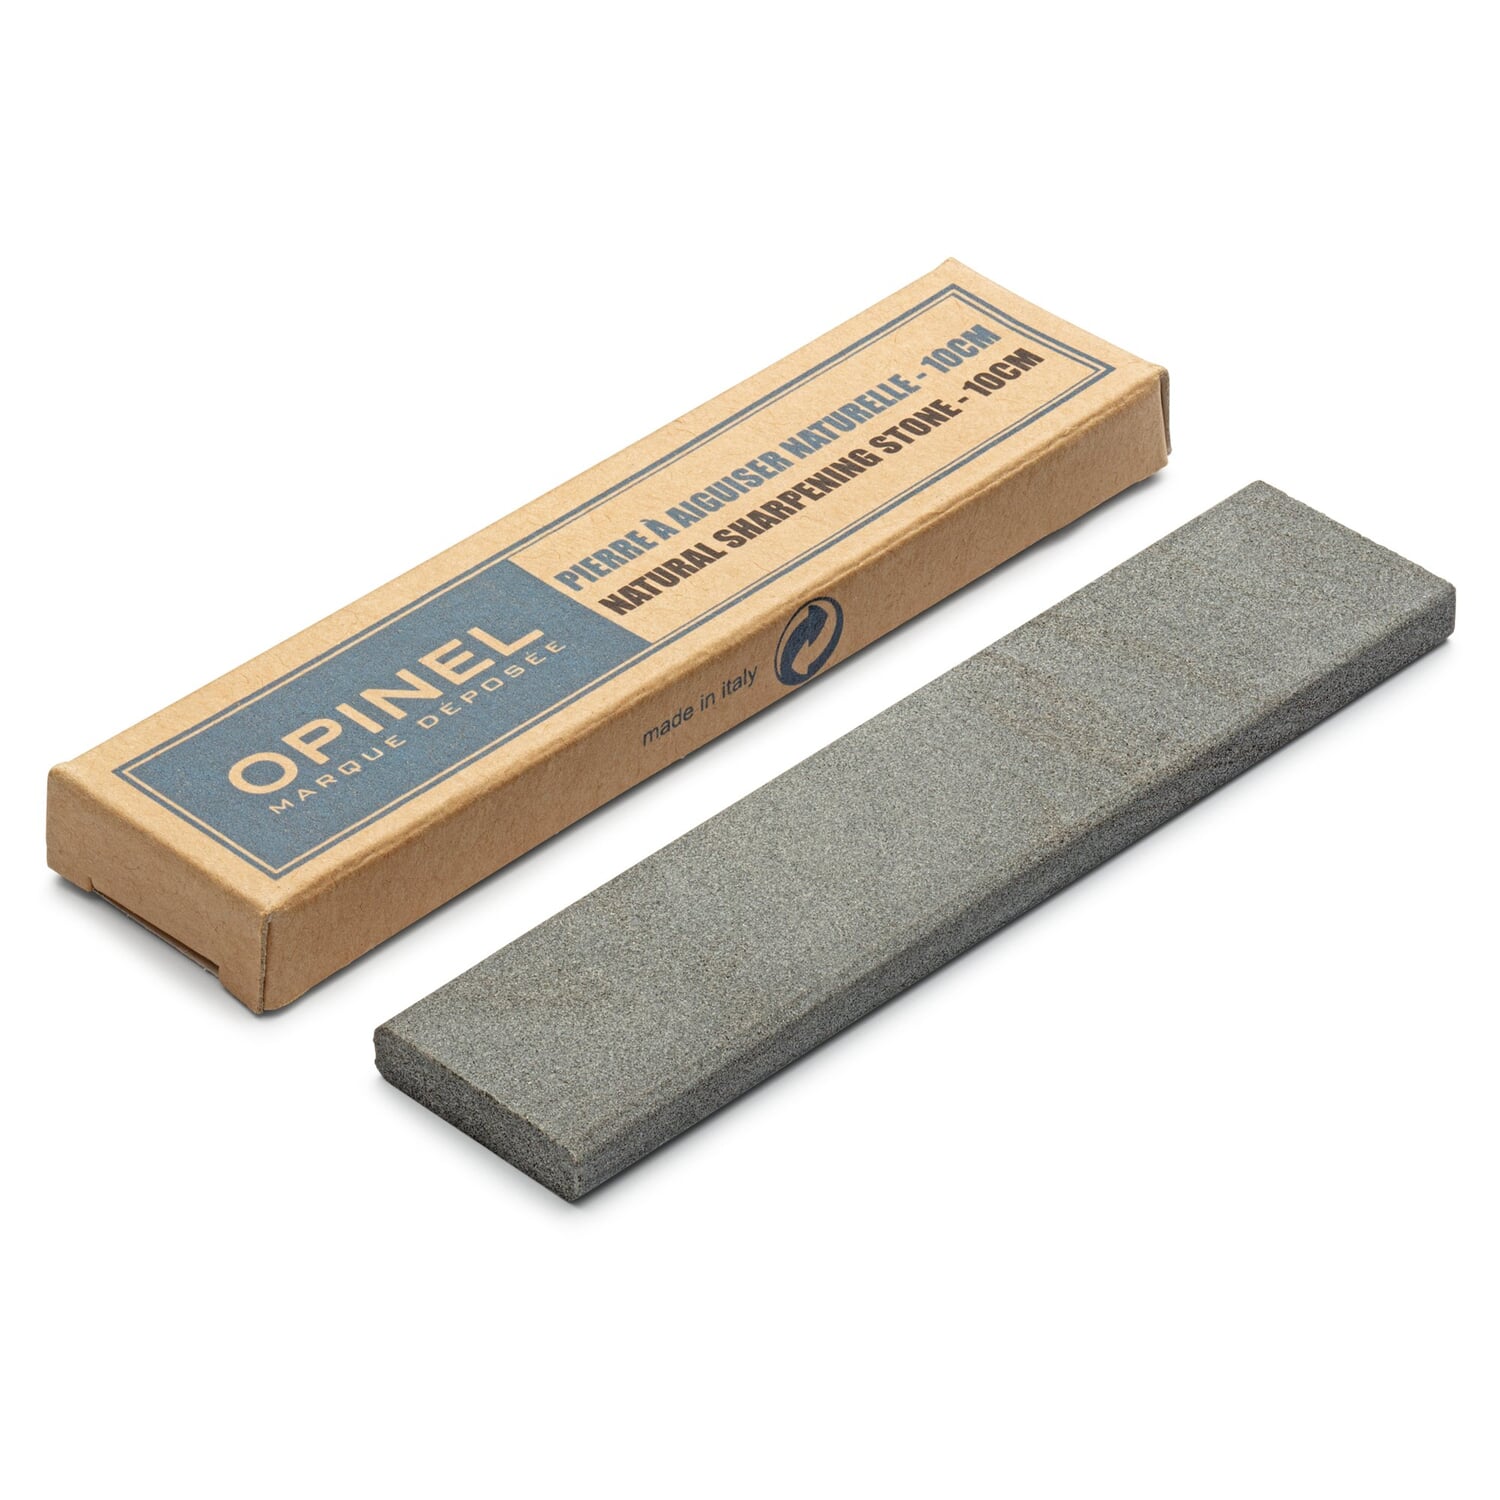 How to use a Pocket Sharpening Stone